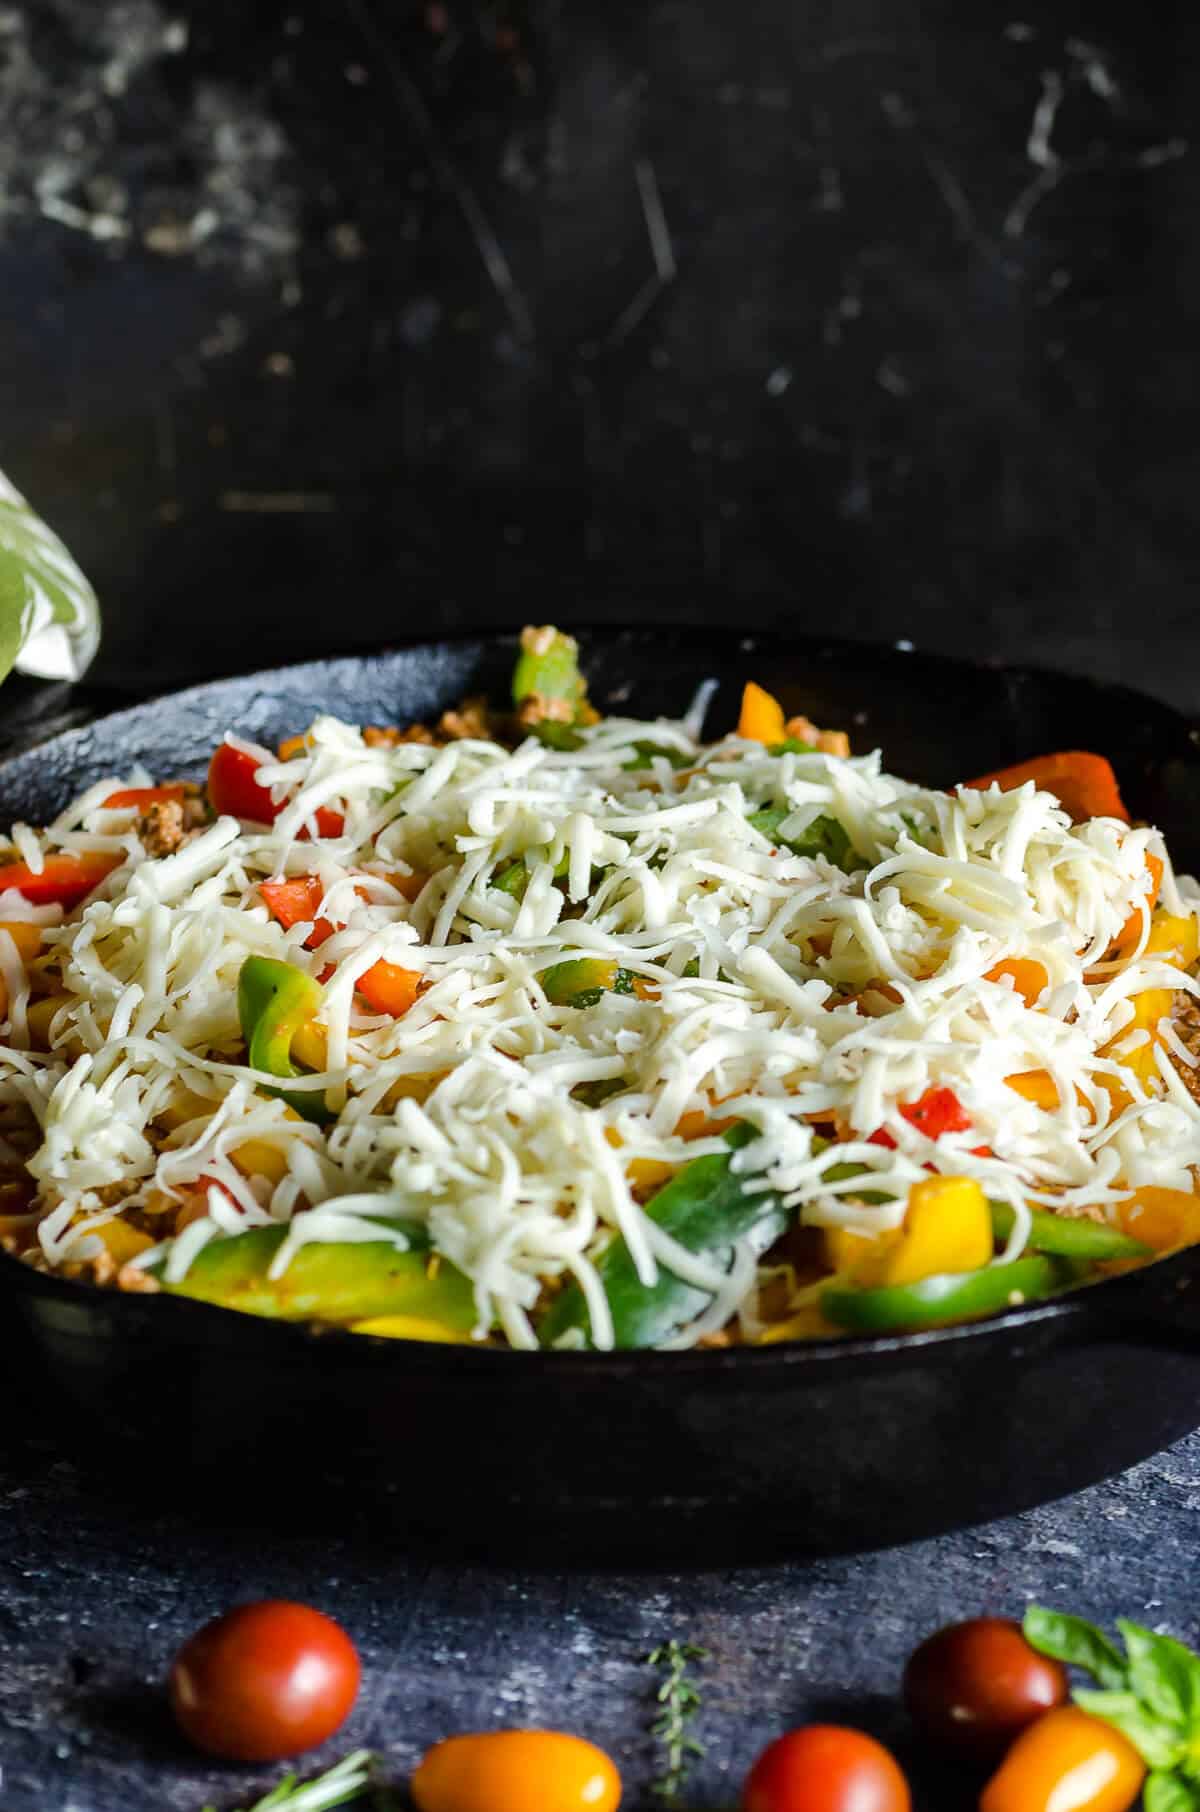 cast iron skillet filled with low carb unstuffed peppers made with ground turkey and cauli rice and sprinkled with cheese ready to go in the oven.